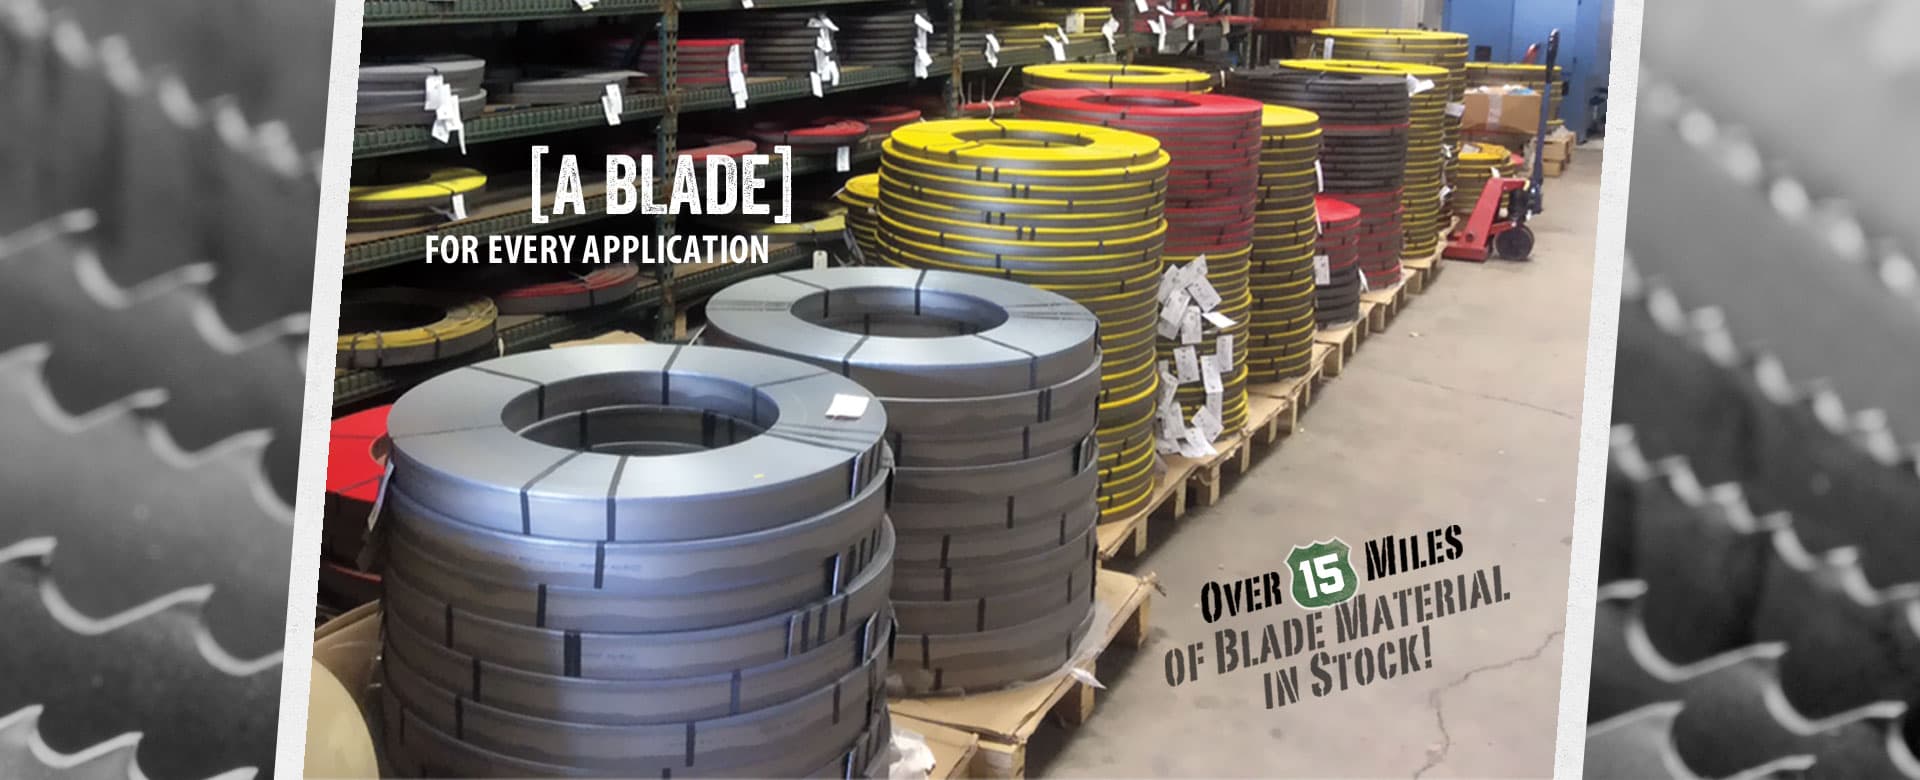 GSS Machinery house over 15 miles of bandsaw blade materials to immediately fit your needs.